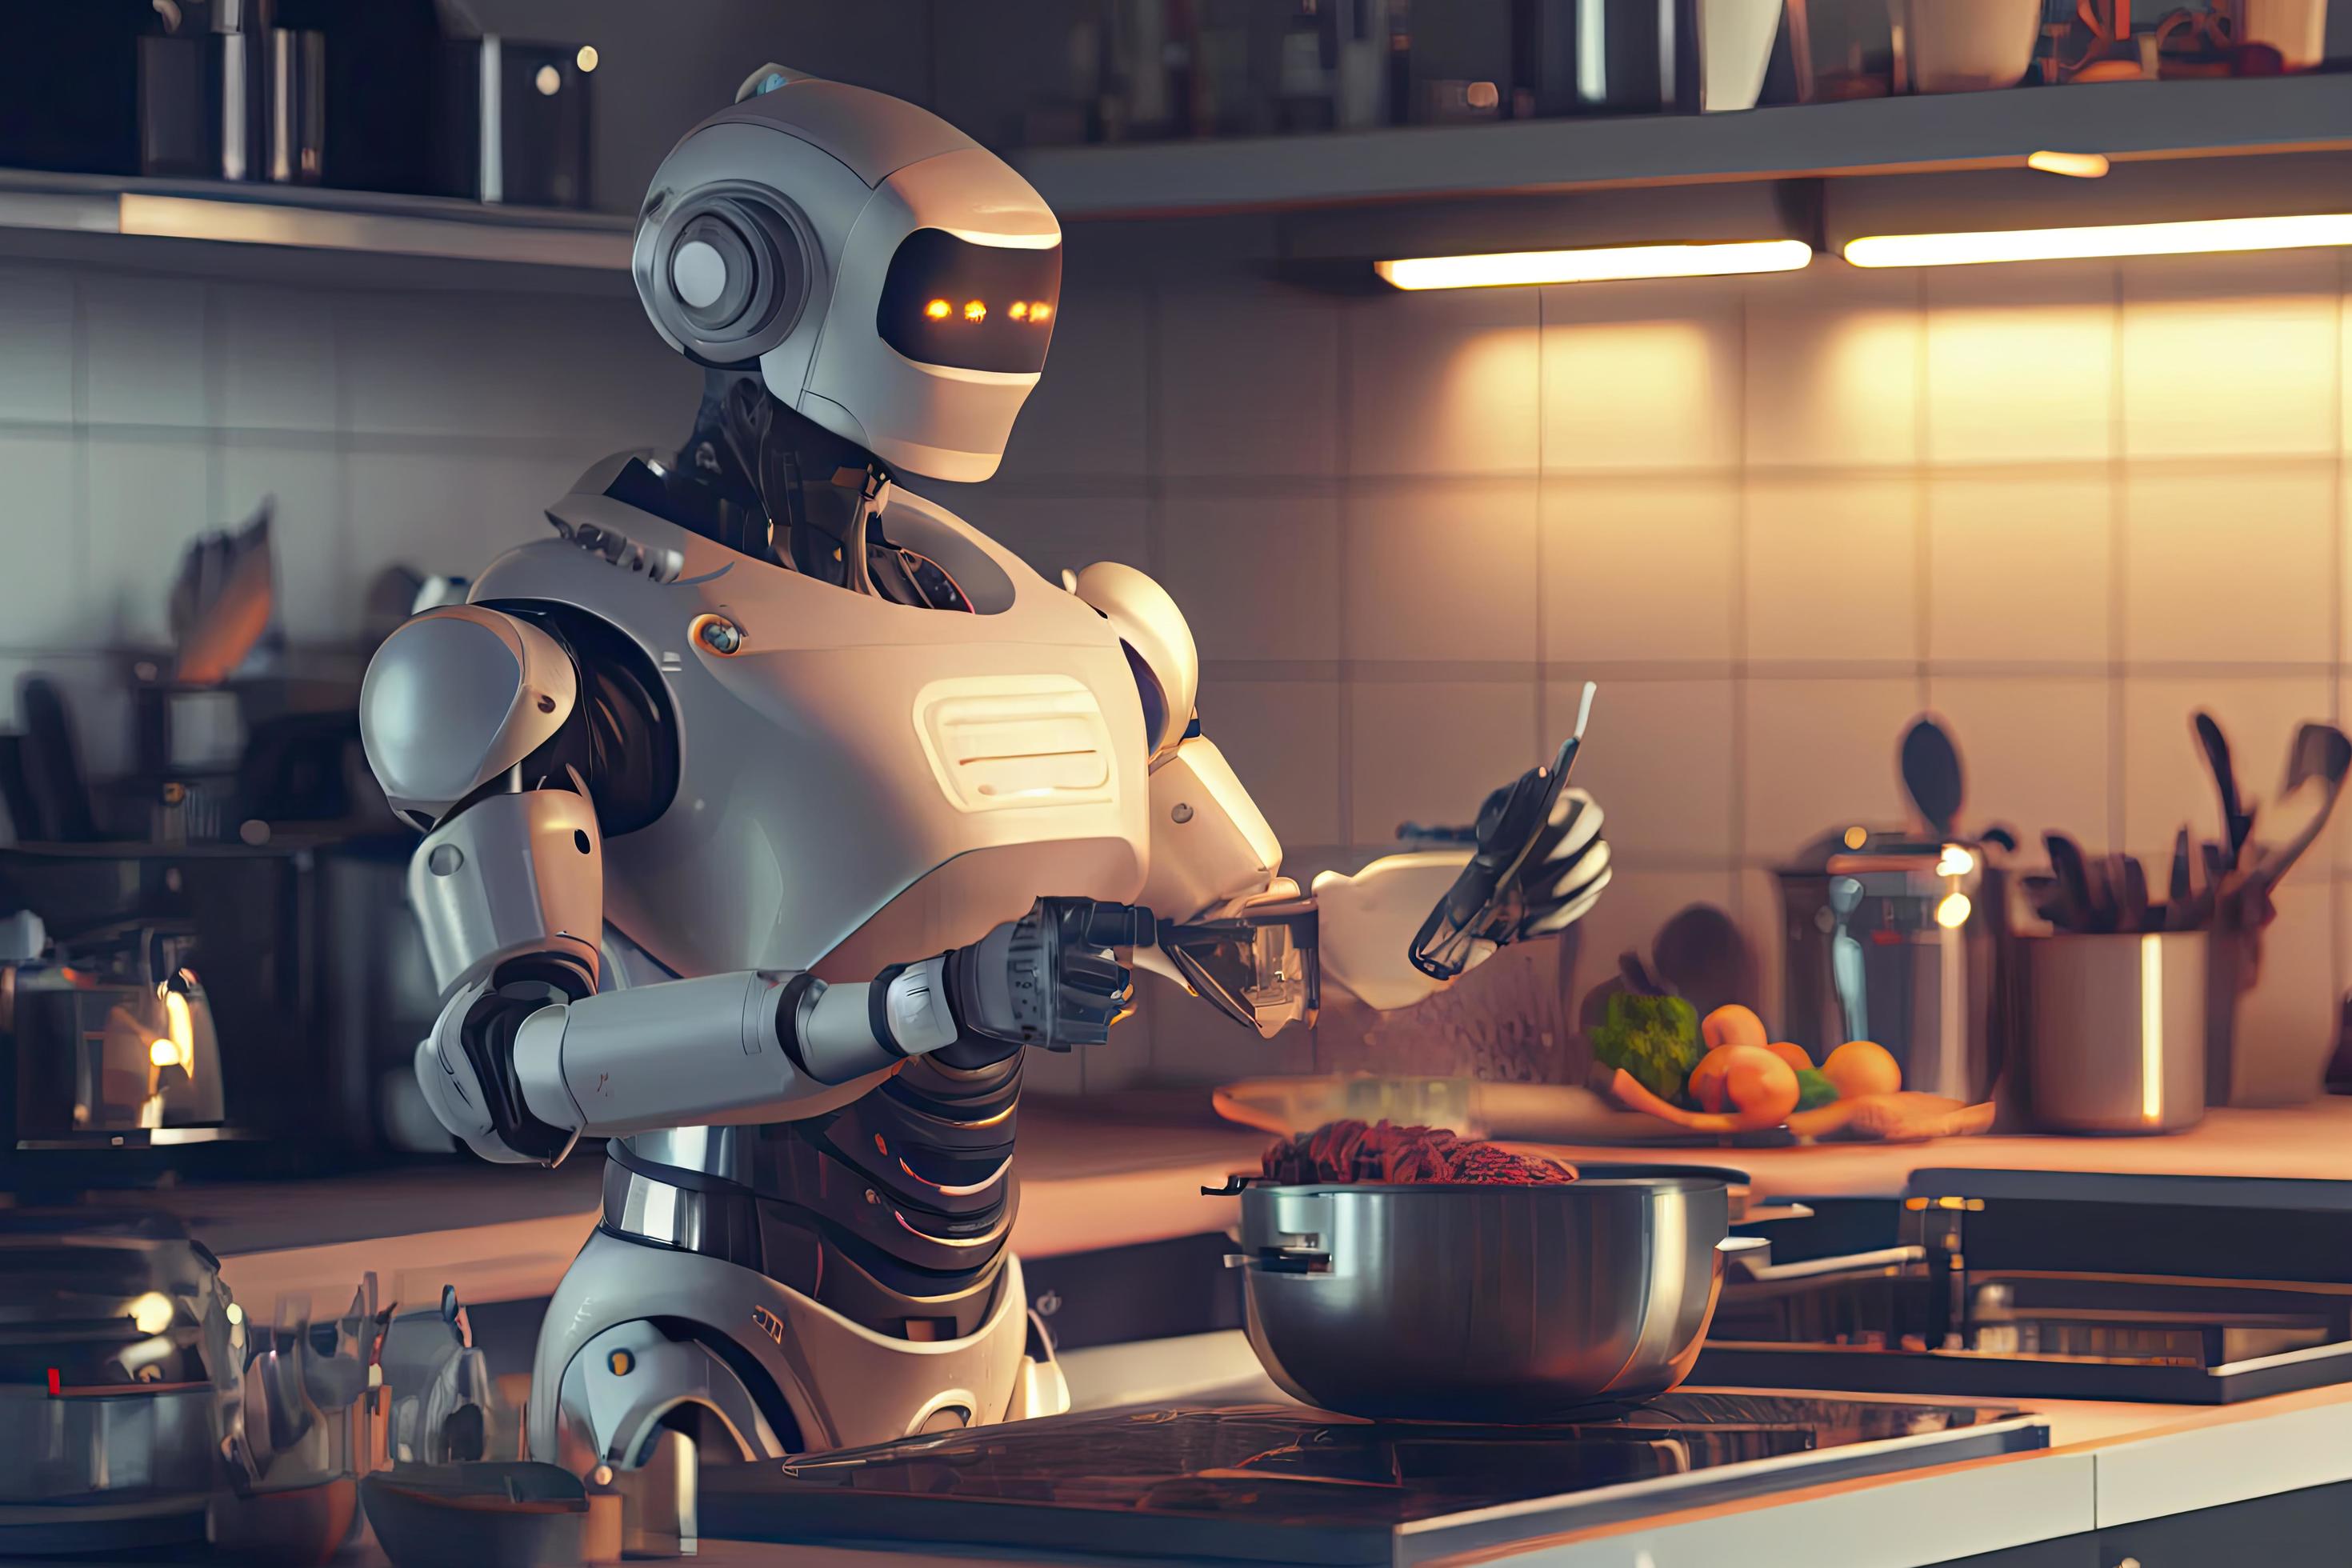 https://static.vecteezy.com/system/resources/previews/021/825/652/large_2x/robot-chef-cooking-in-kitchen-of-future-home-genius-smart-robot-working-in-modern-house-free-photo.jpg